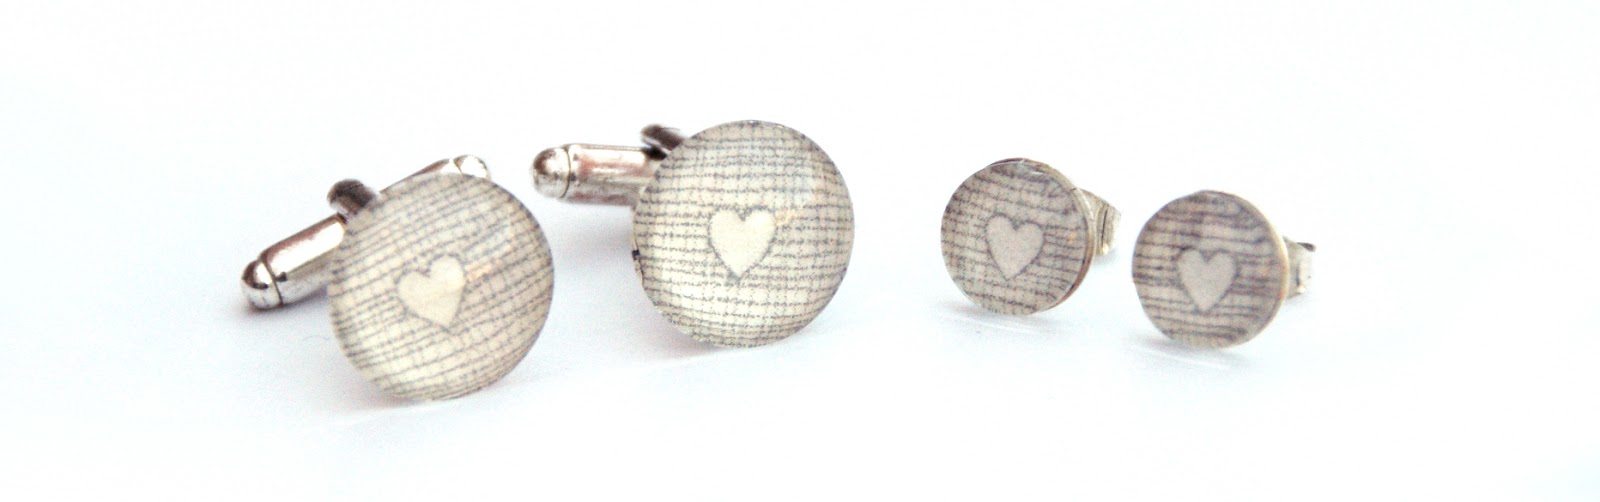 https://www.etsy.com/uk/listing/178909220/his-hers-grey-heart-cufflinks-and